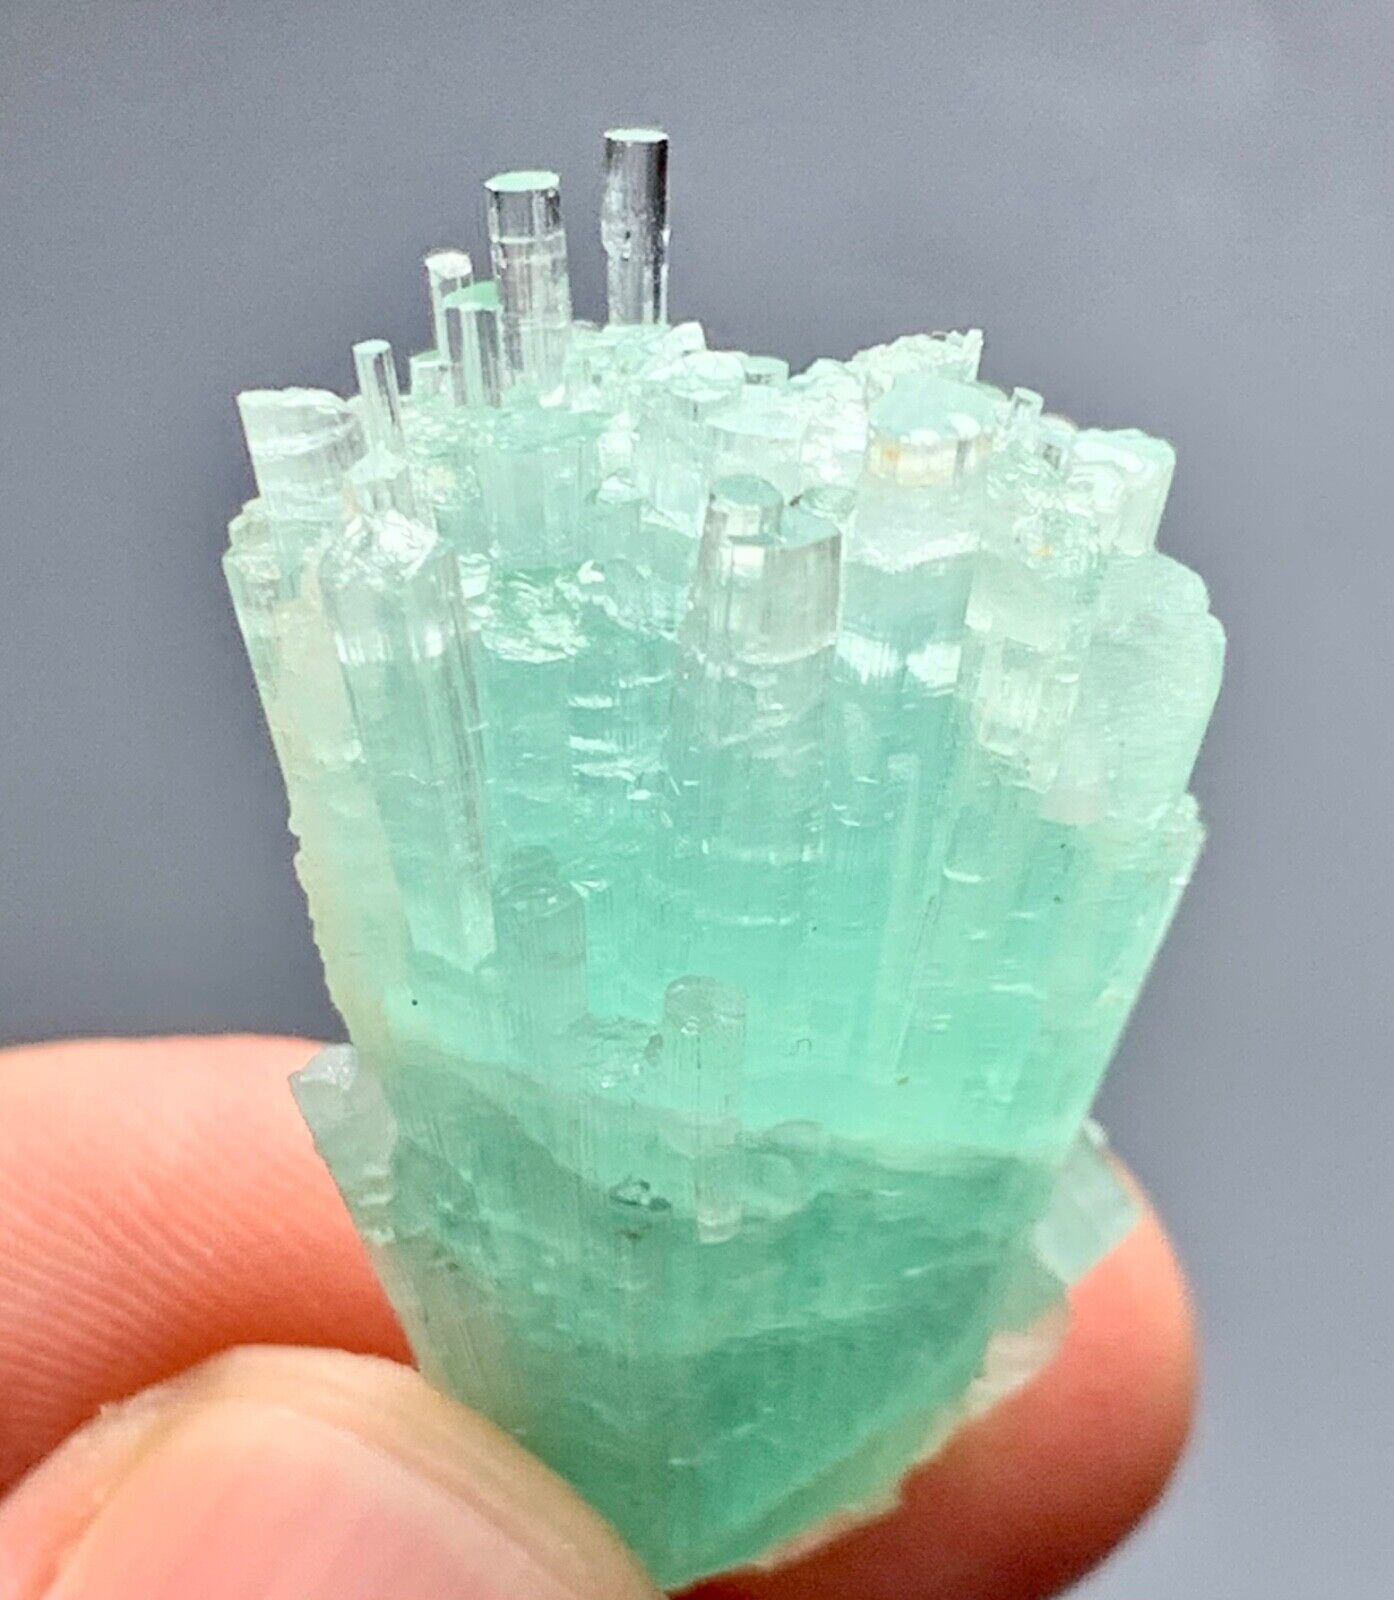 69 carats Amazing Tourmaline Crystal Bunch Specimen From Afghanistan